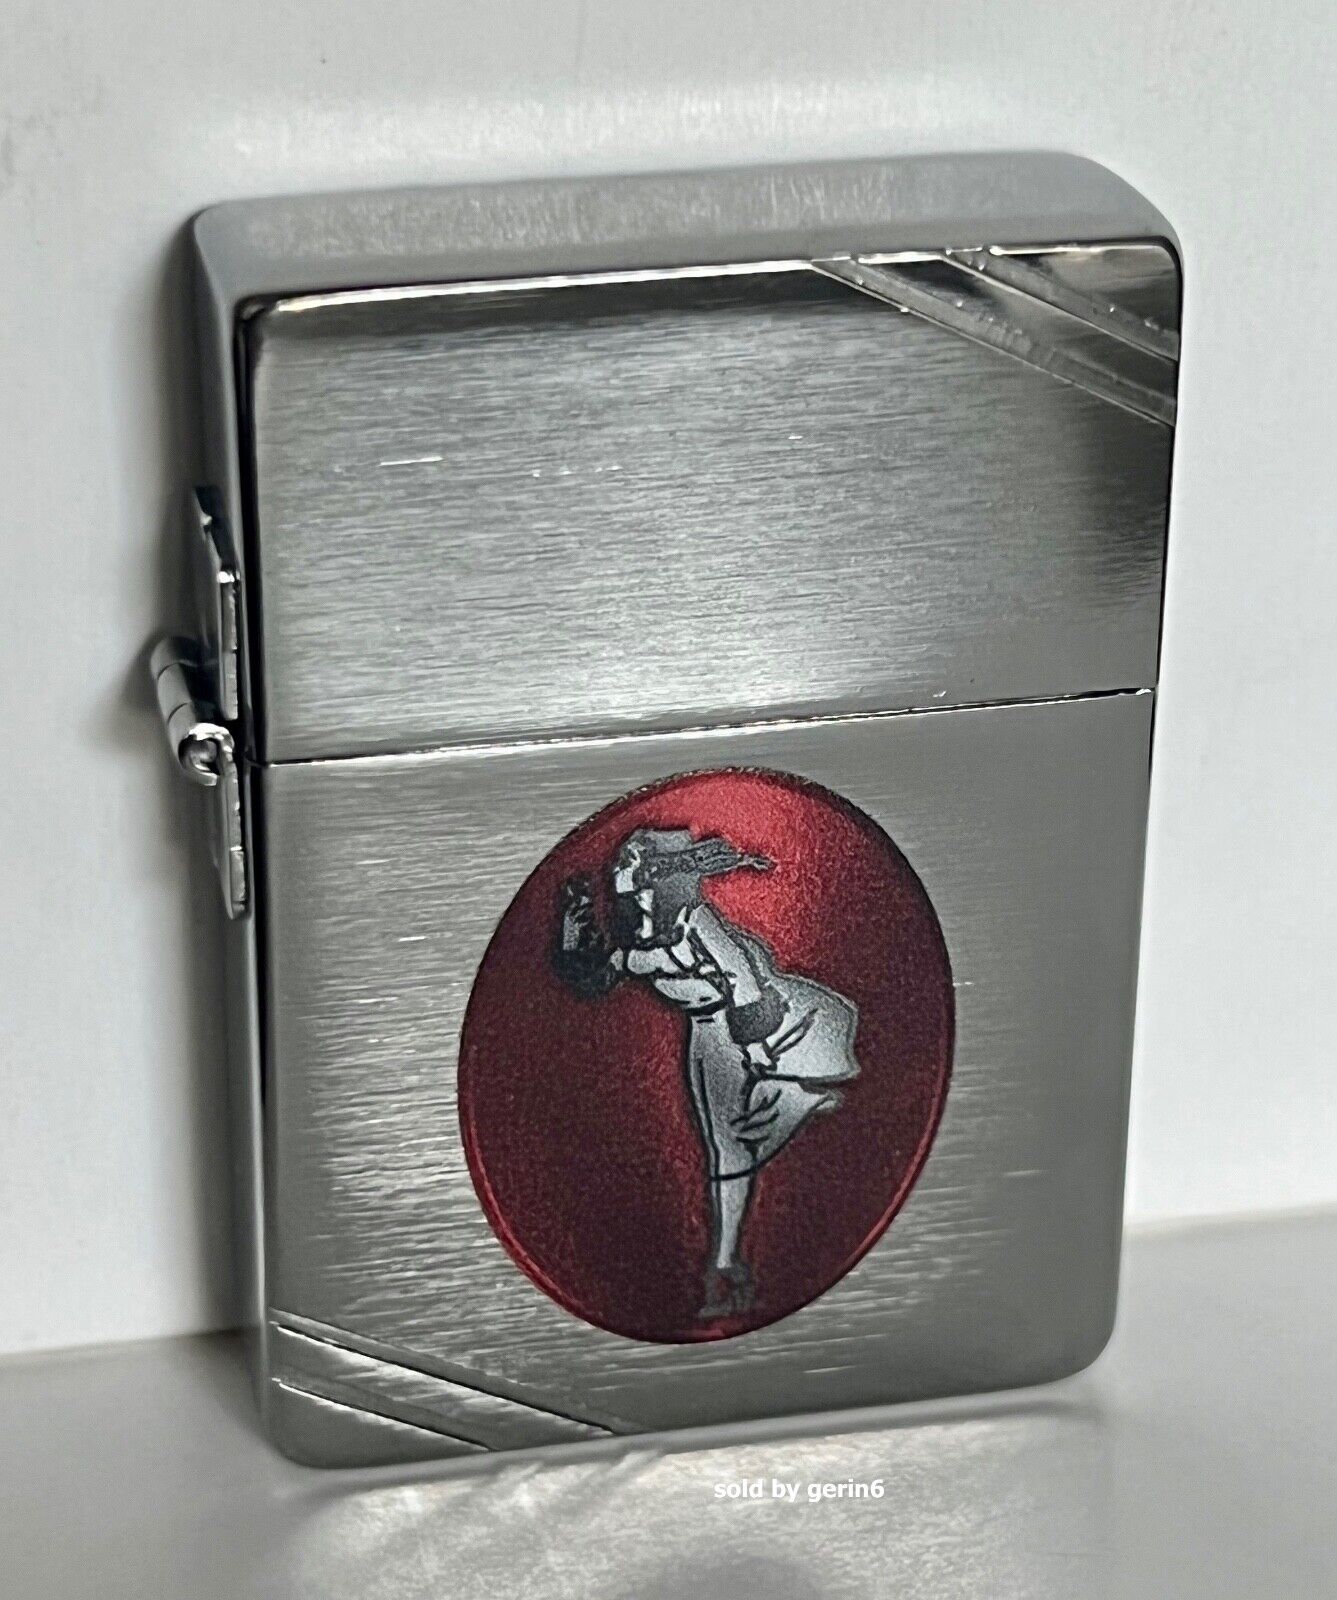 Zippo Windproof Replica 1935 Lighter With Windy, 97139 New In Box